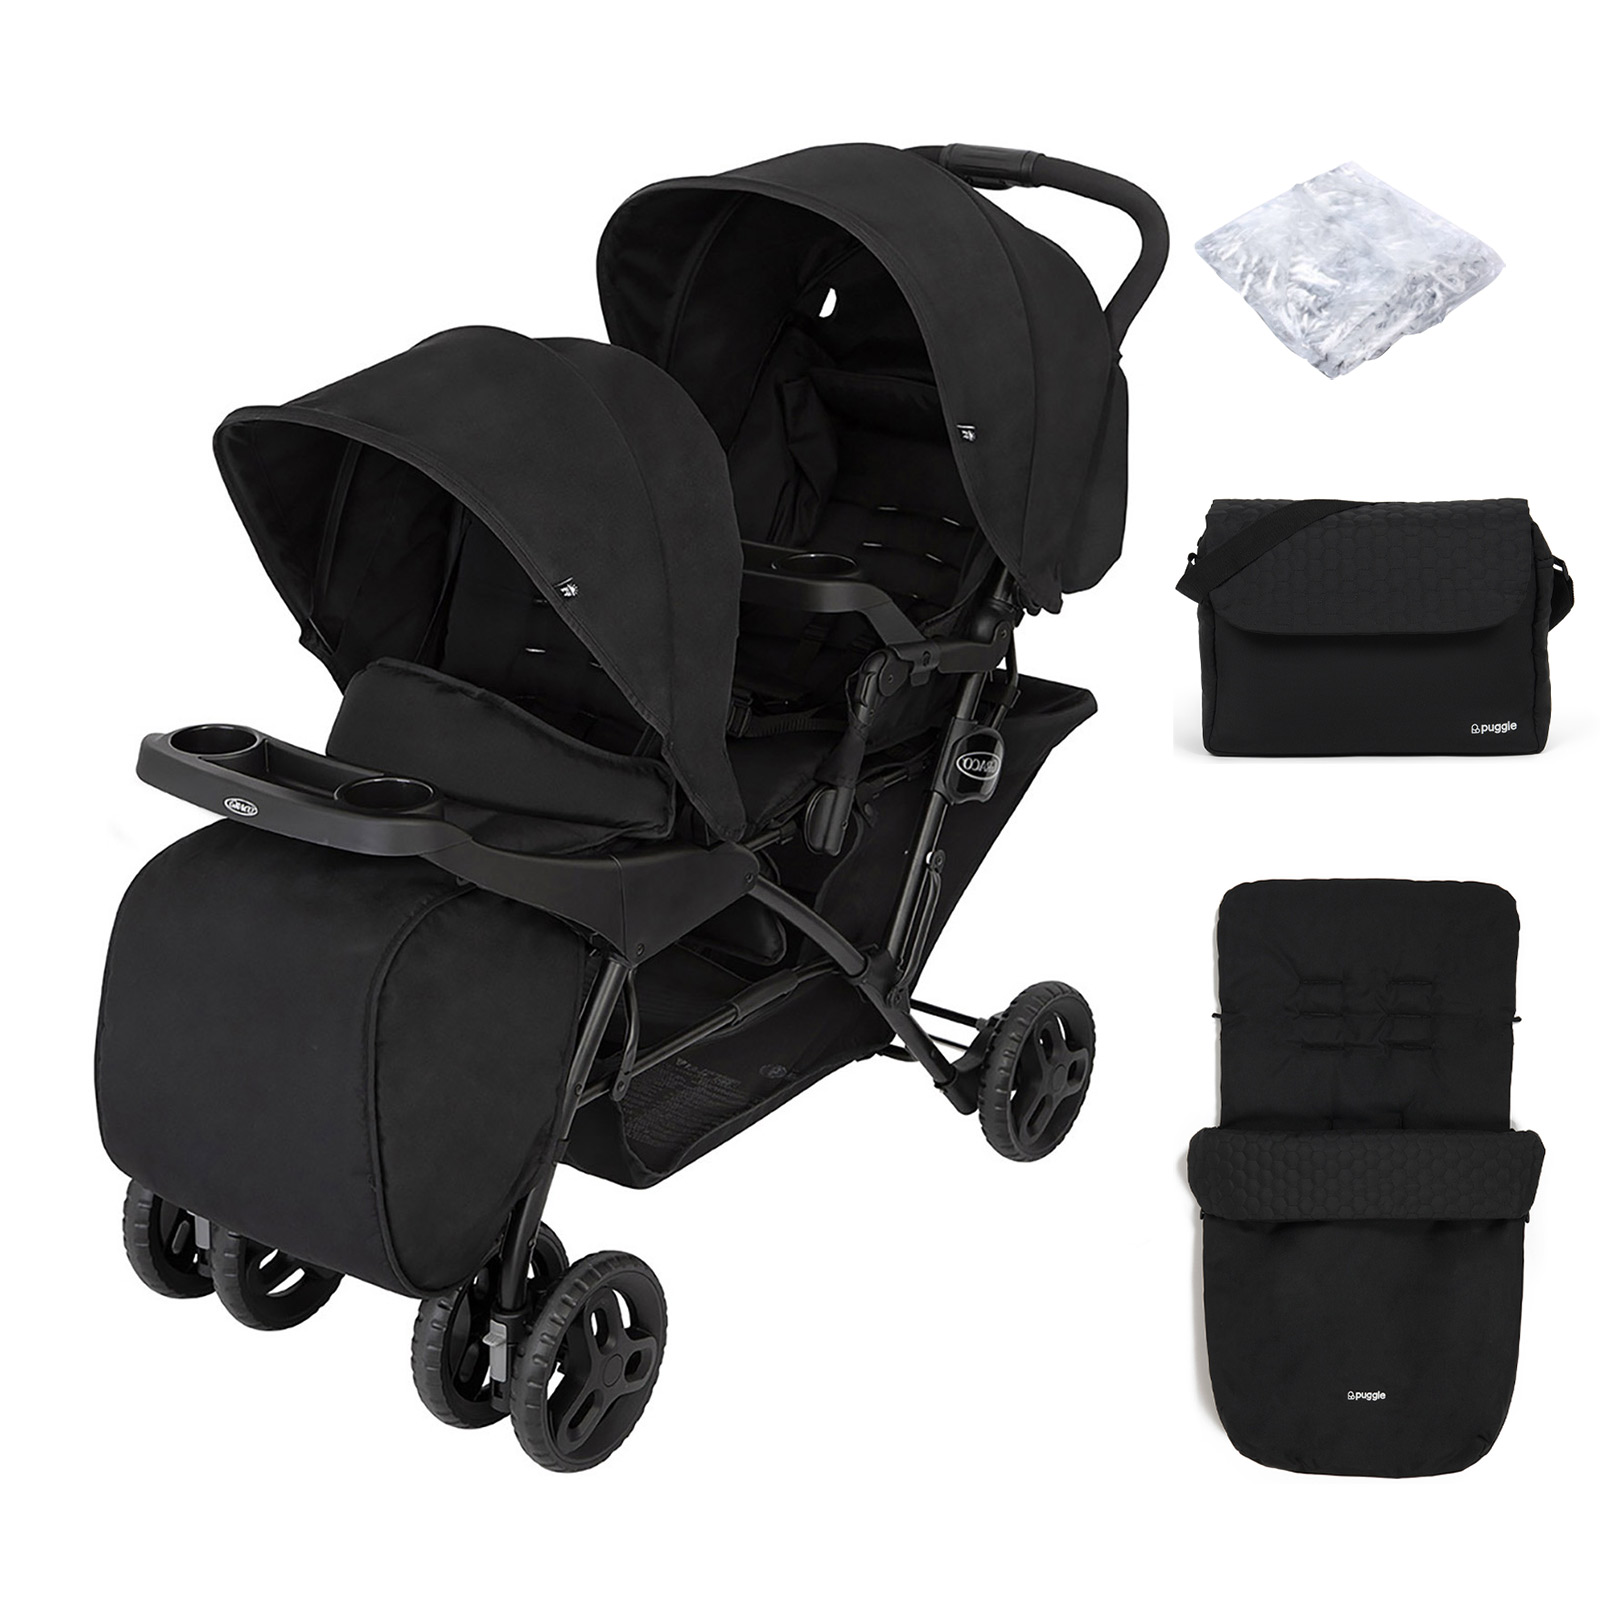 Graco Blaaze™ Stadium Duo Tandem Pushchair with Front Apron, Raincover, Footmuff & Changing Bag - Night Sky